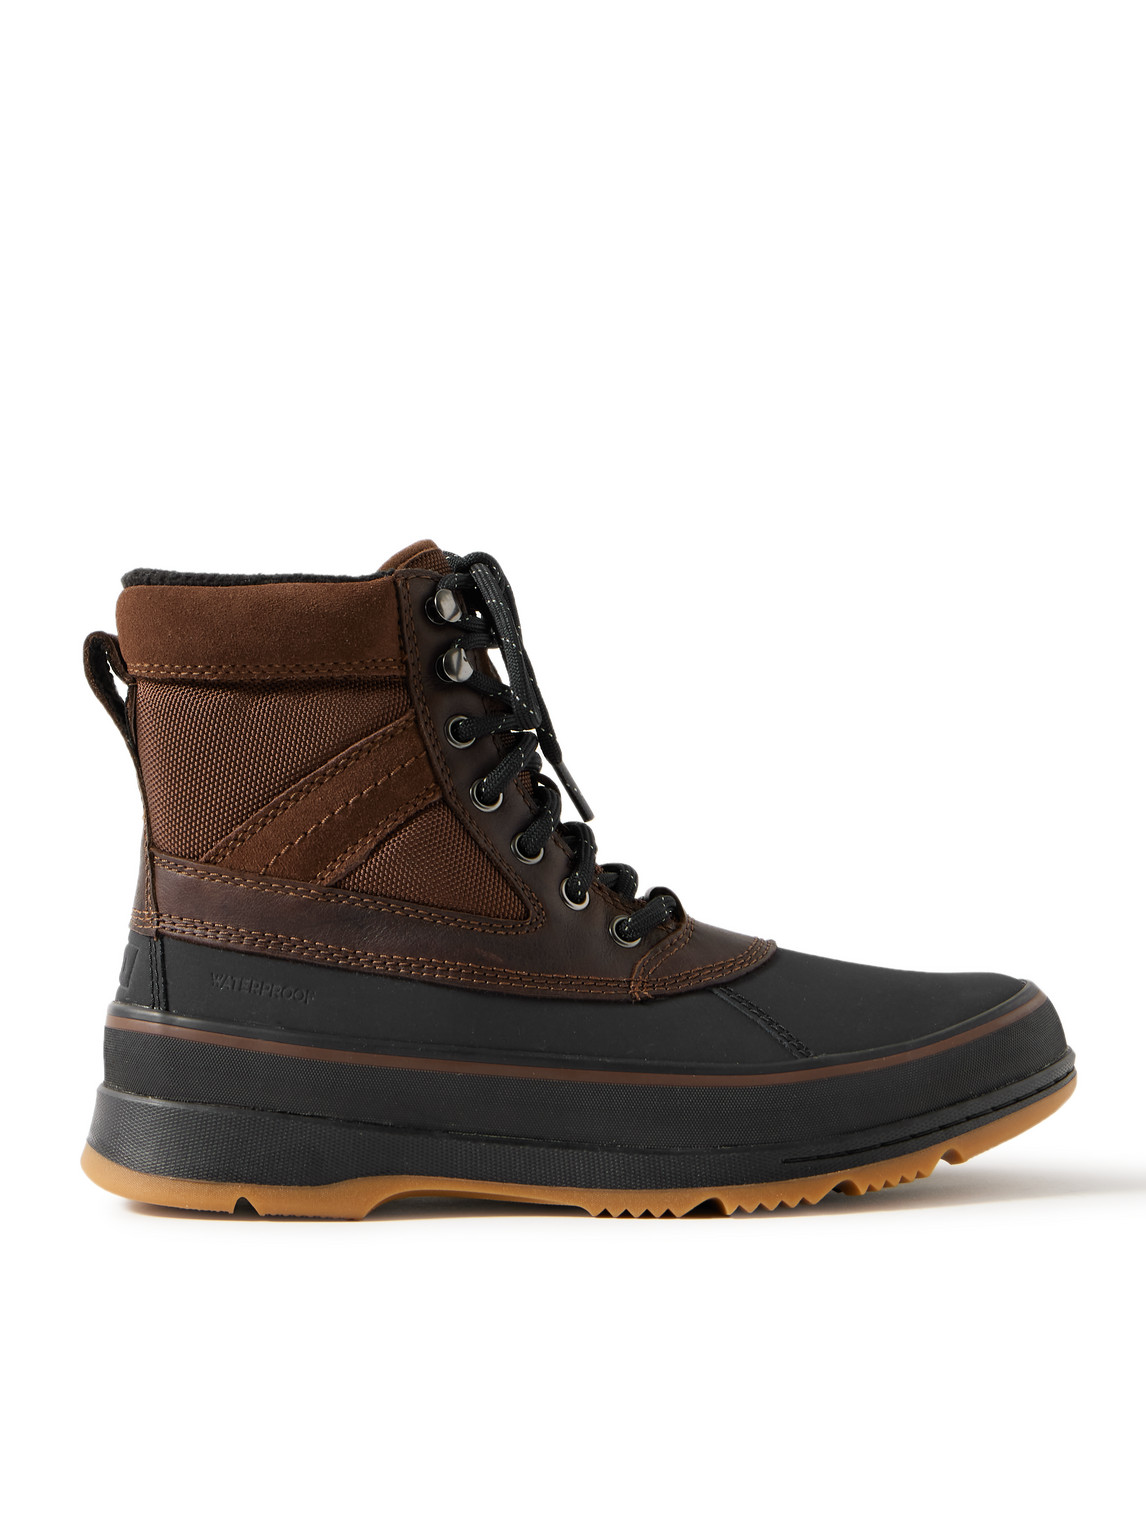 Sorel - Ankeny™ II Leather- and Suede-Trimmed Nylon and Rubber Boots - Men - Brown - US 7 von Sorel